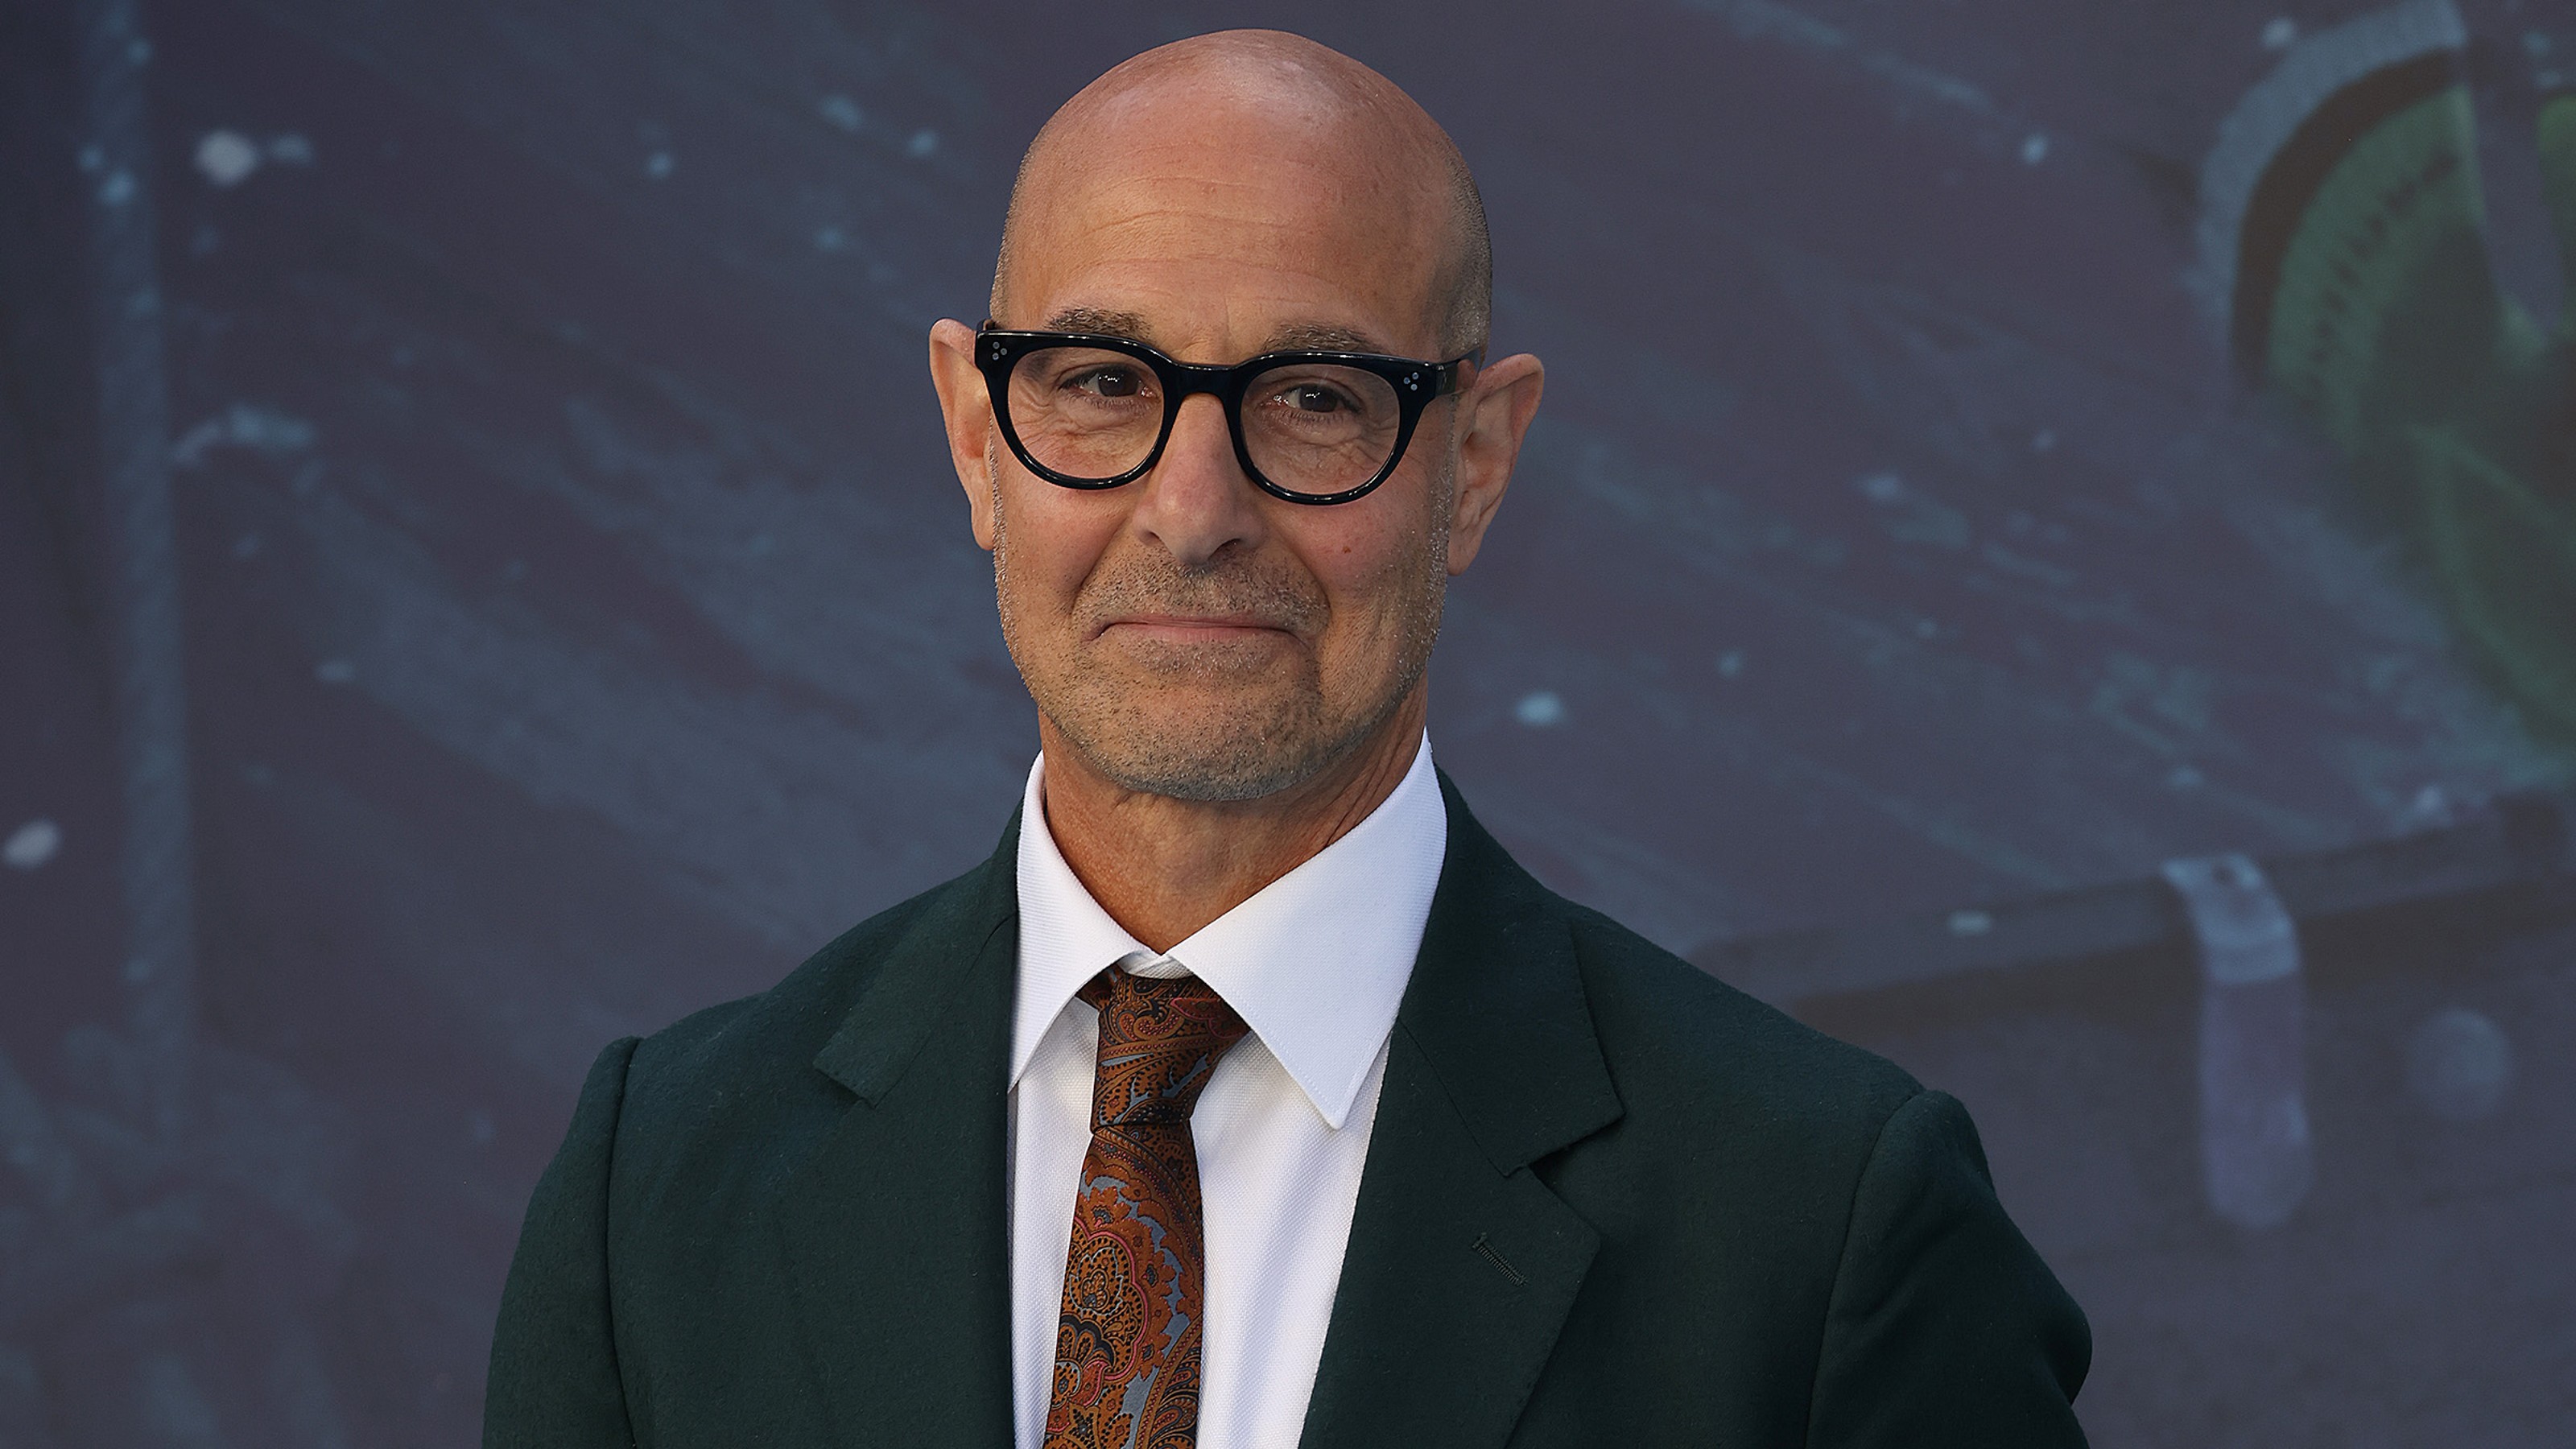 Stanley Tucci Launches New, Made-In-Italy Cookware